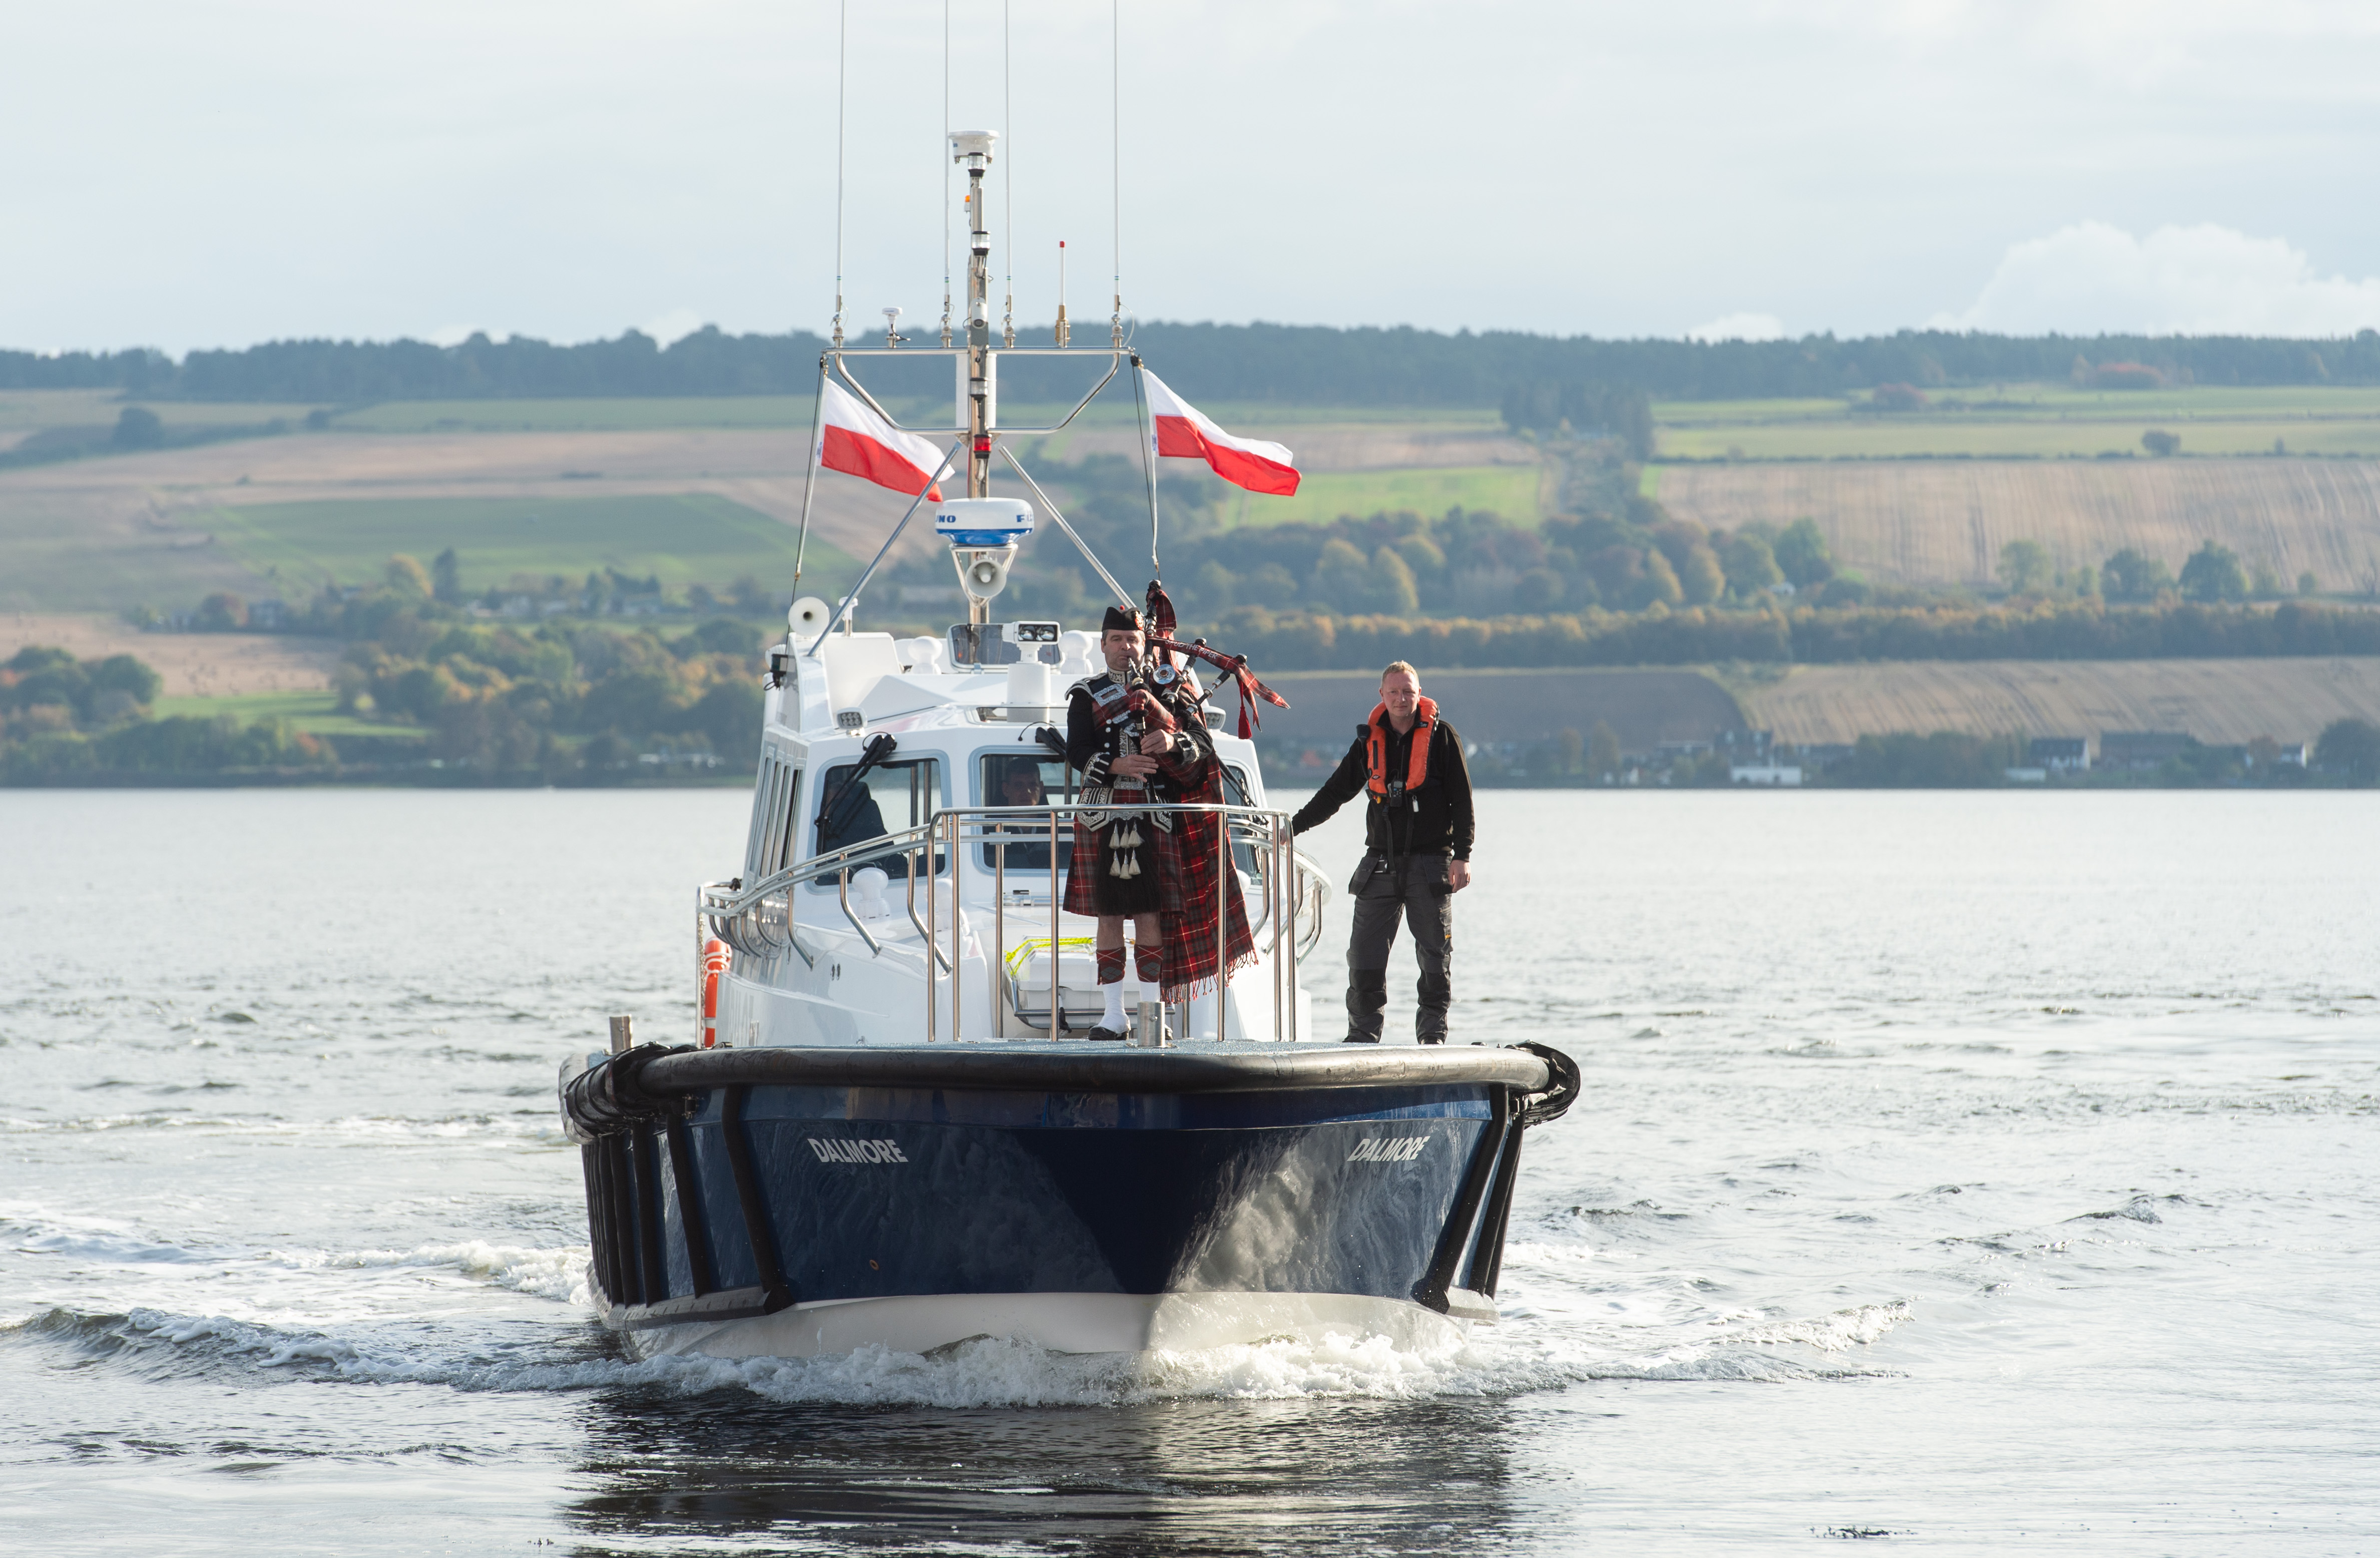 Port of Cromarty Firth took delivery of a new custom-built pilot boat – the Dalmore - in October. Picture by Jason Hedges